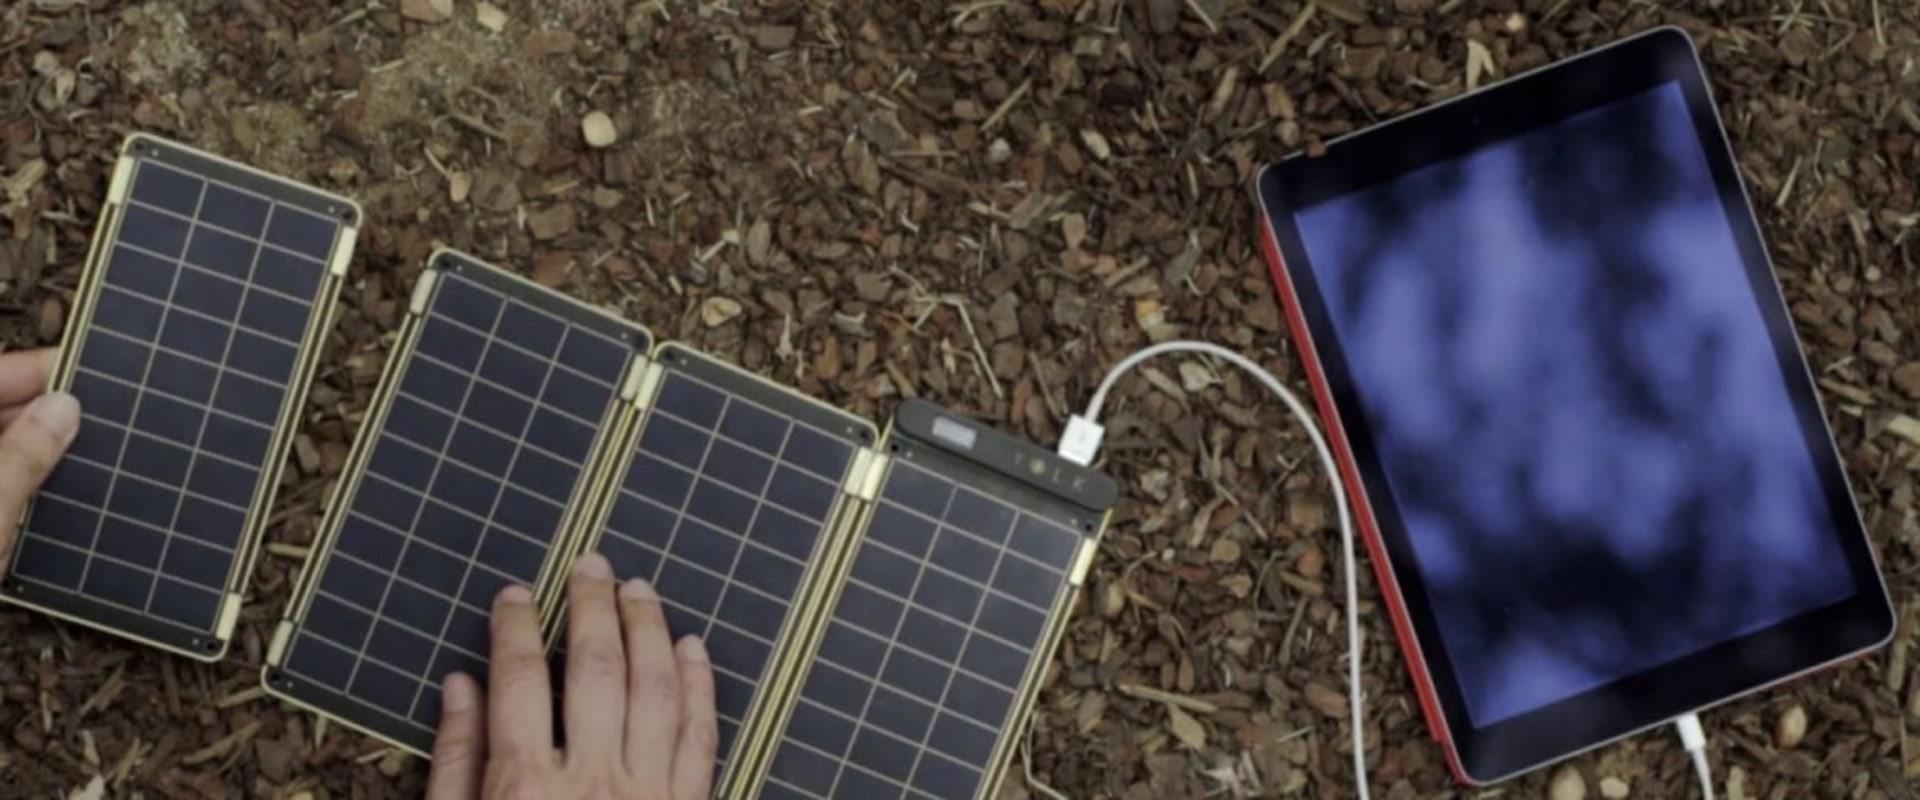 Reviews of Solar-Powered Phones